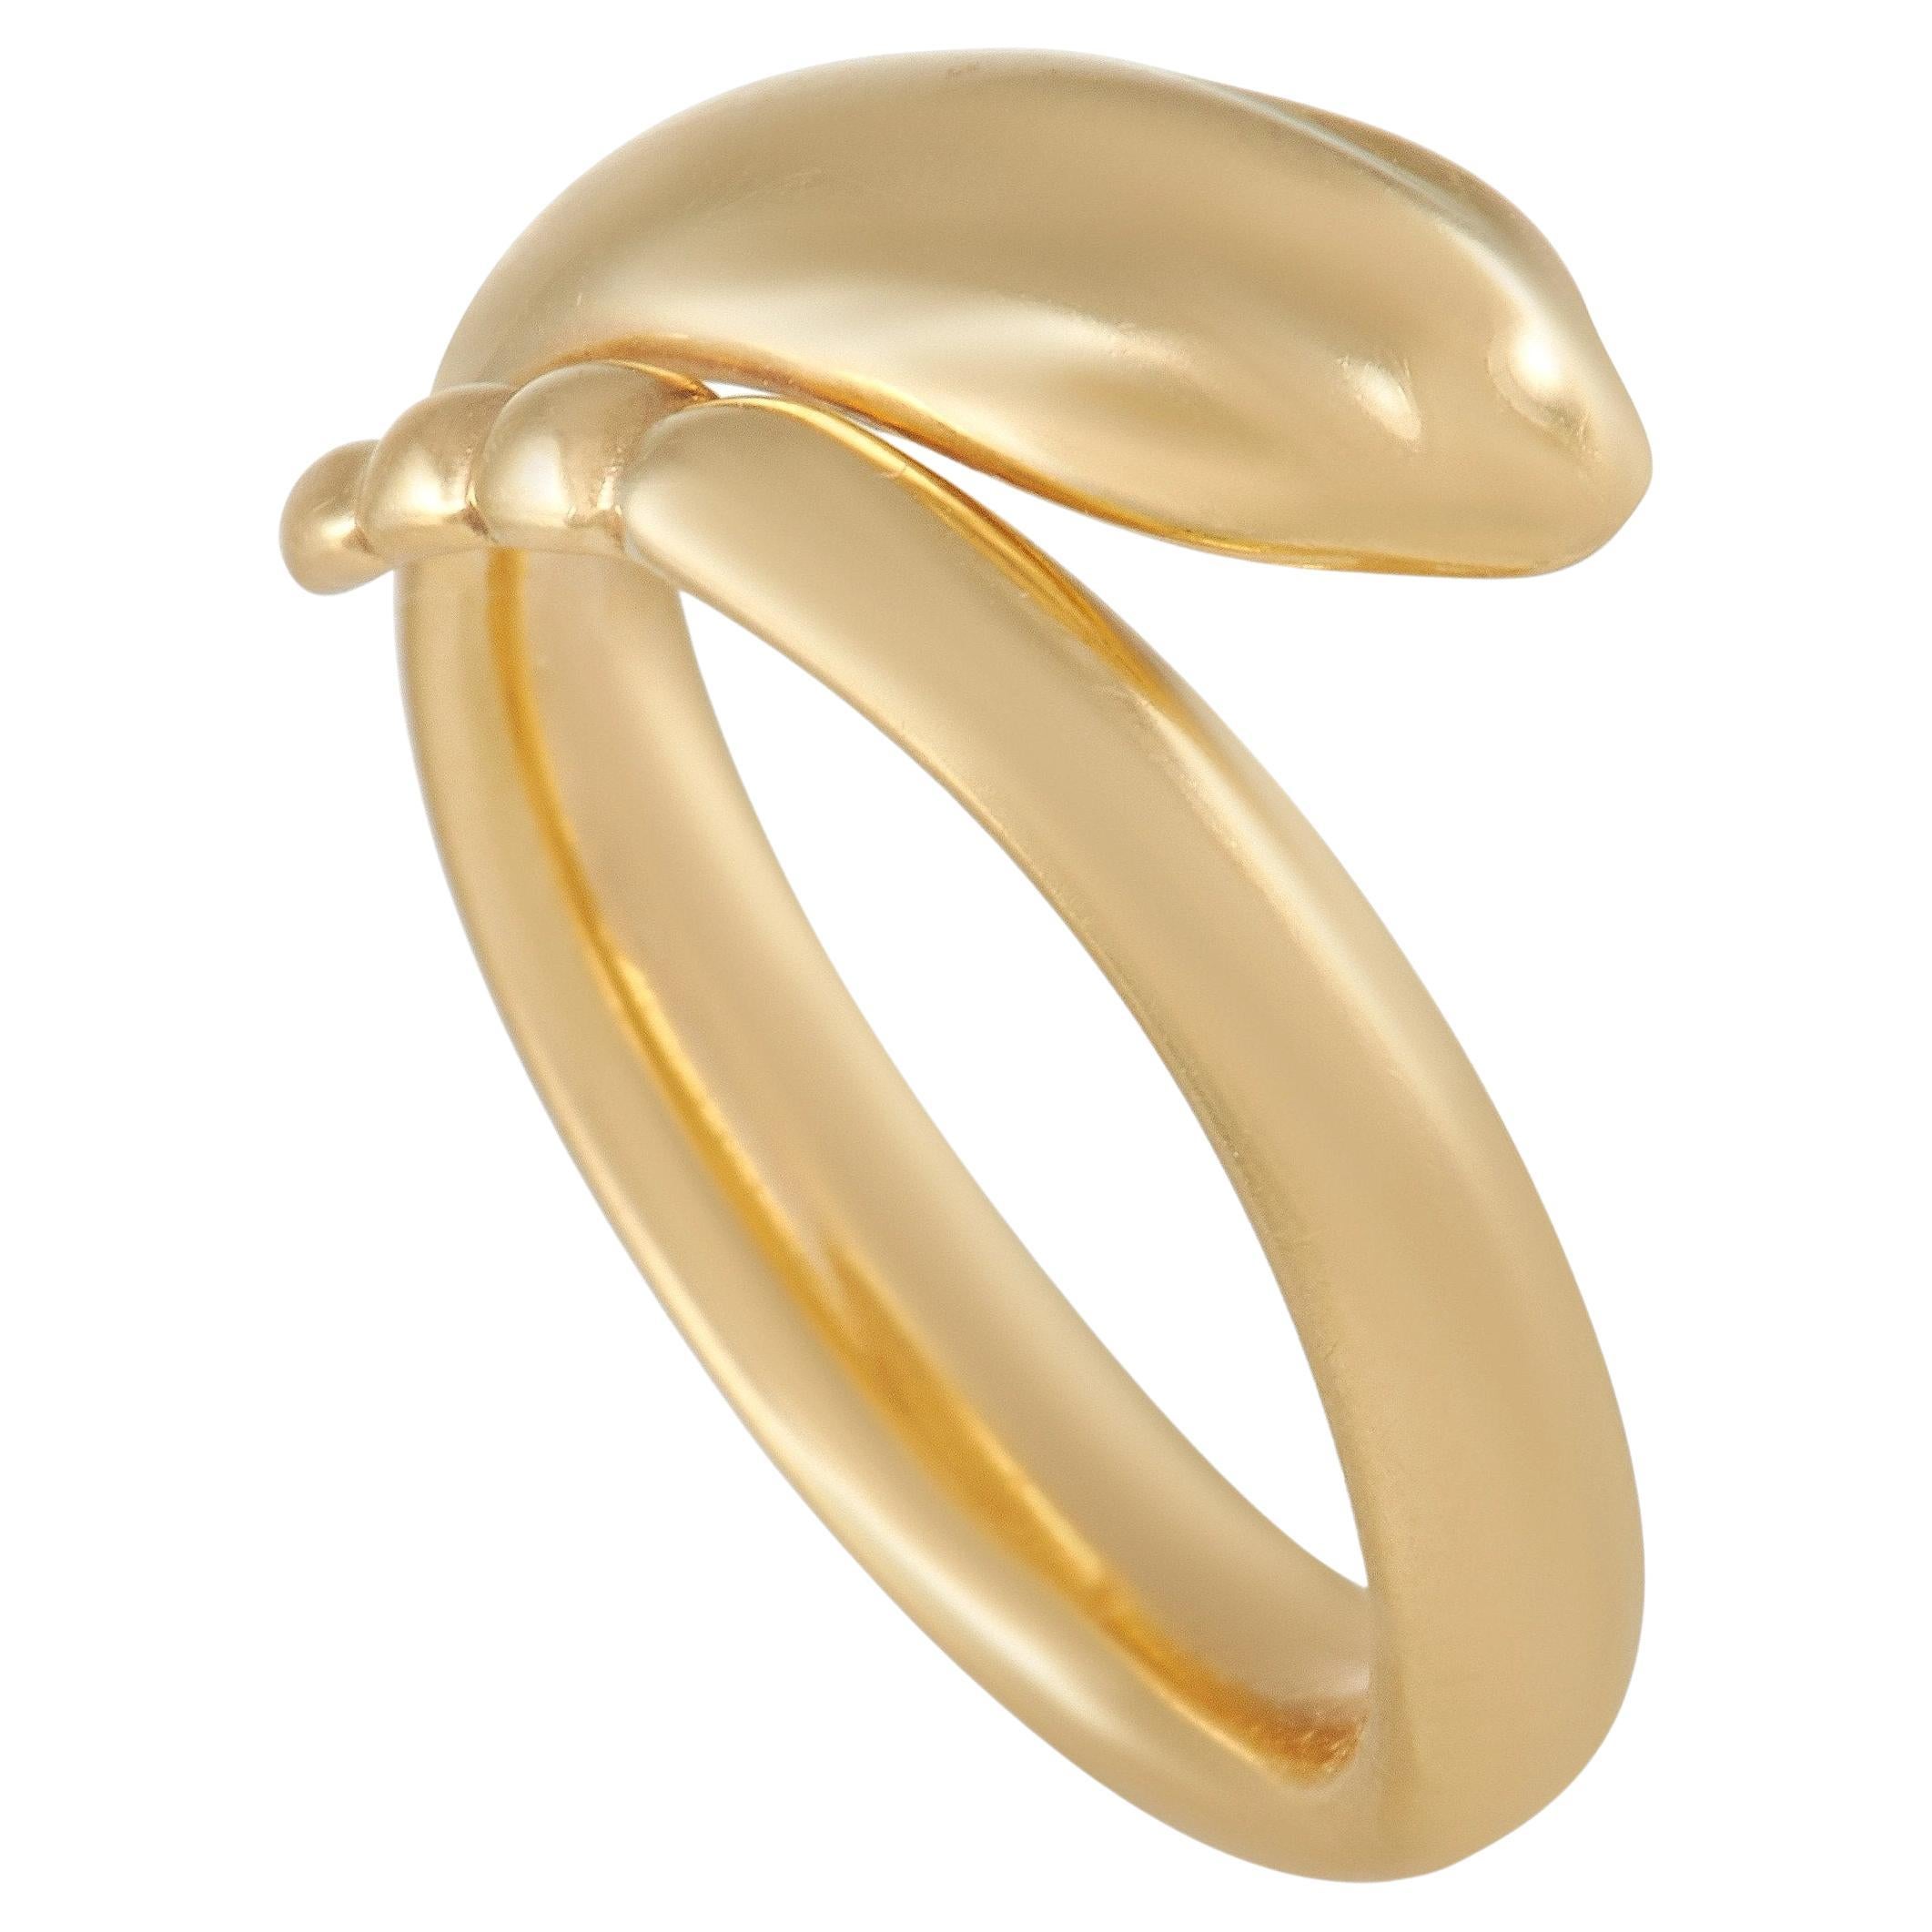 Tiffany and Co. Elsa Peretti Five-Row Wave Ring in 18 Karat White Gold ...